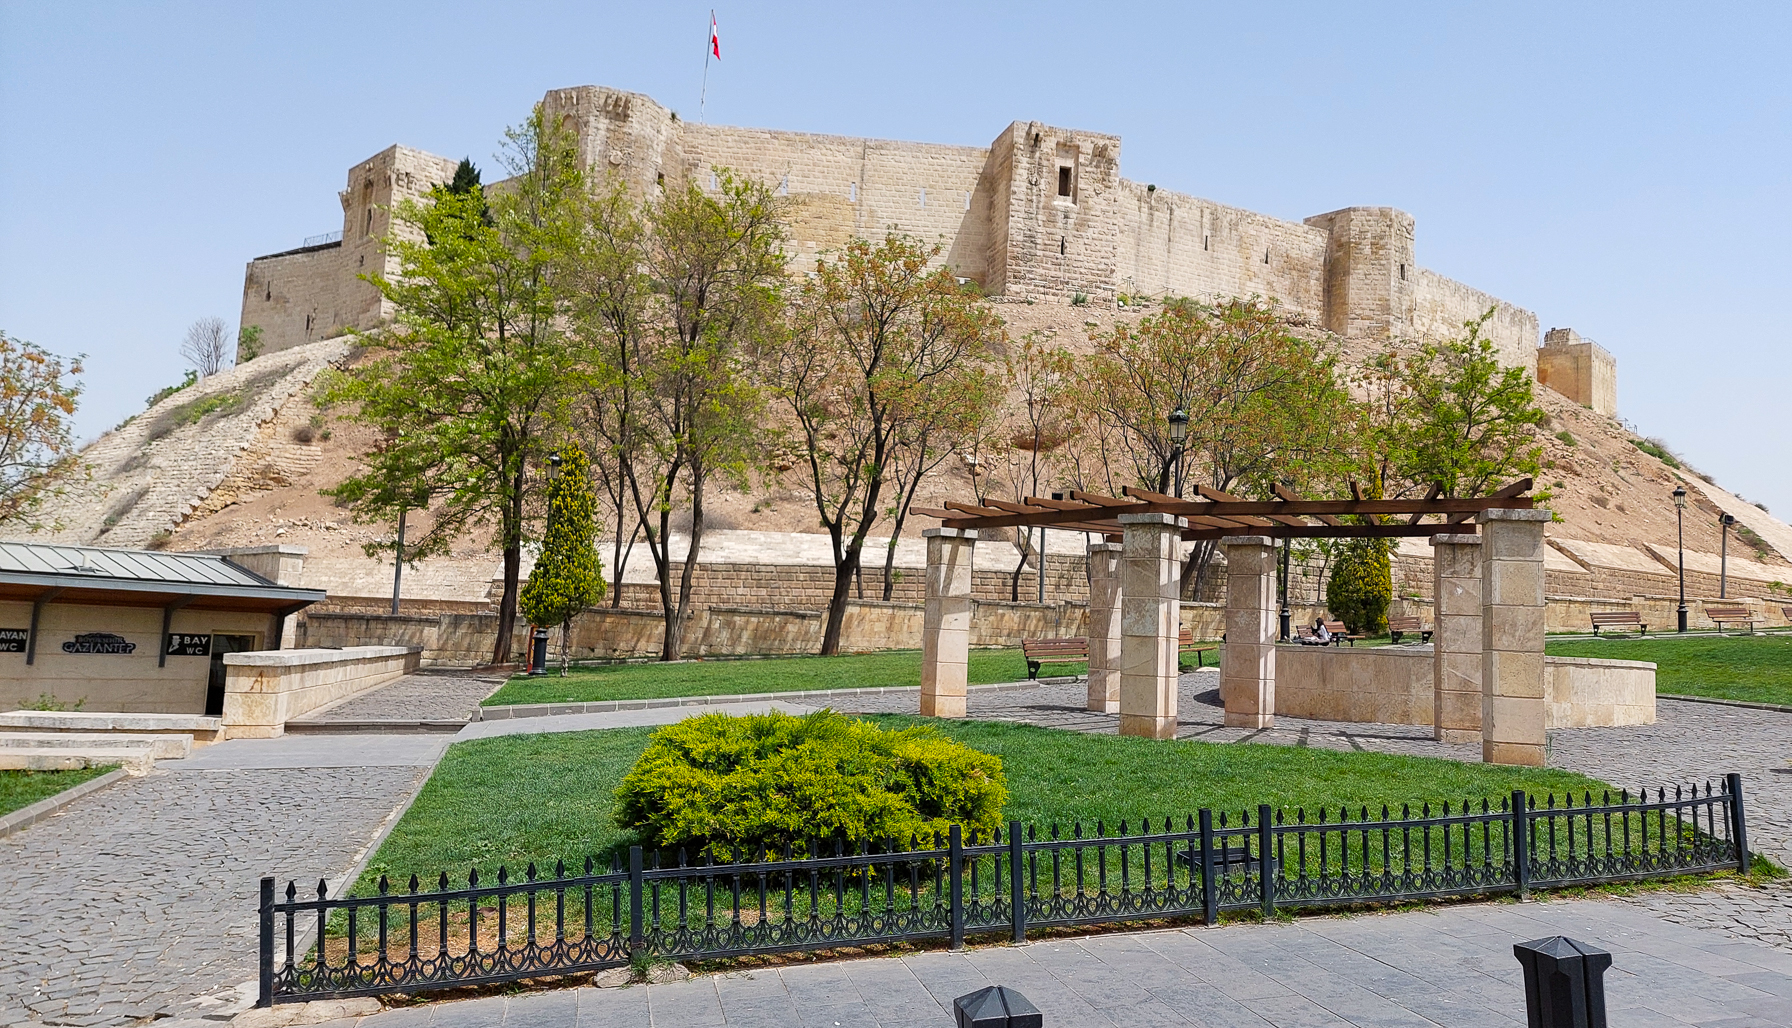 <span  class="uc_style_uc_tiles_grid_image_elementor_uc_items_attribute_title" style="color:#ffffff;">Gaziantep</span>